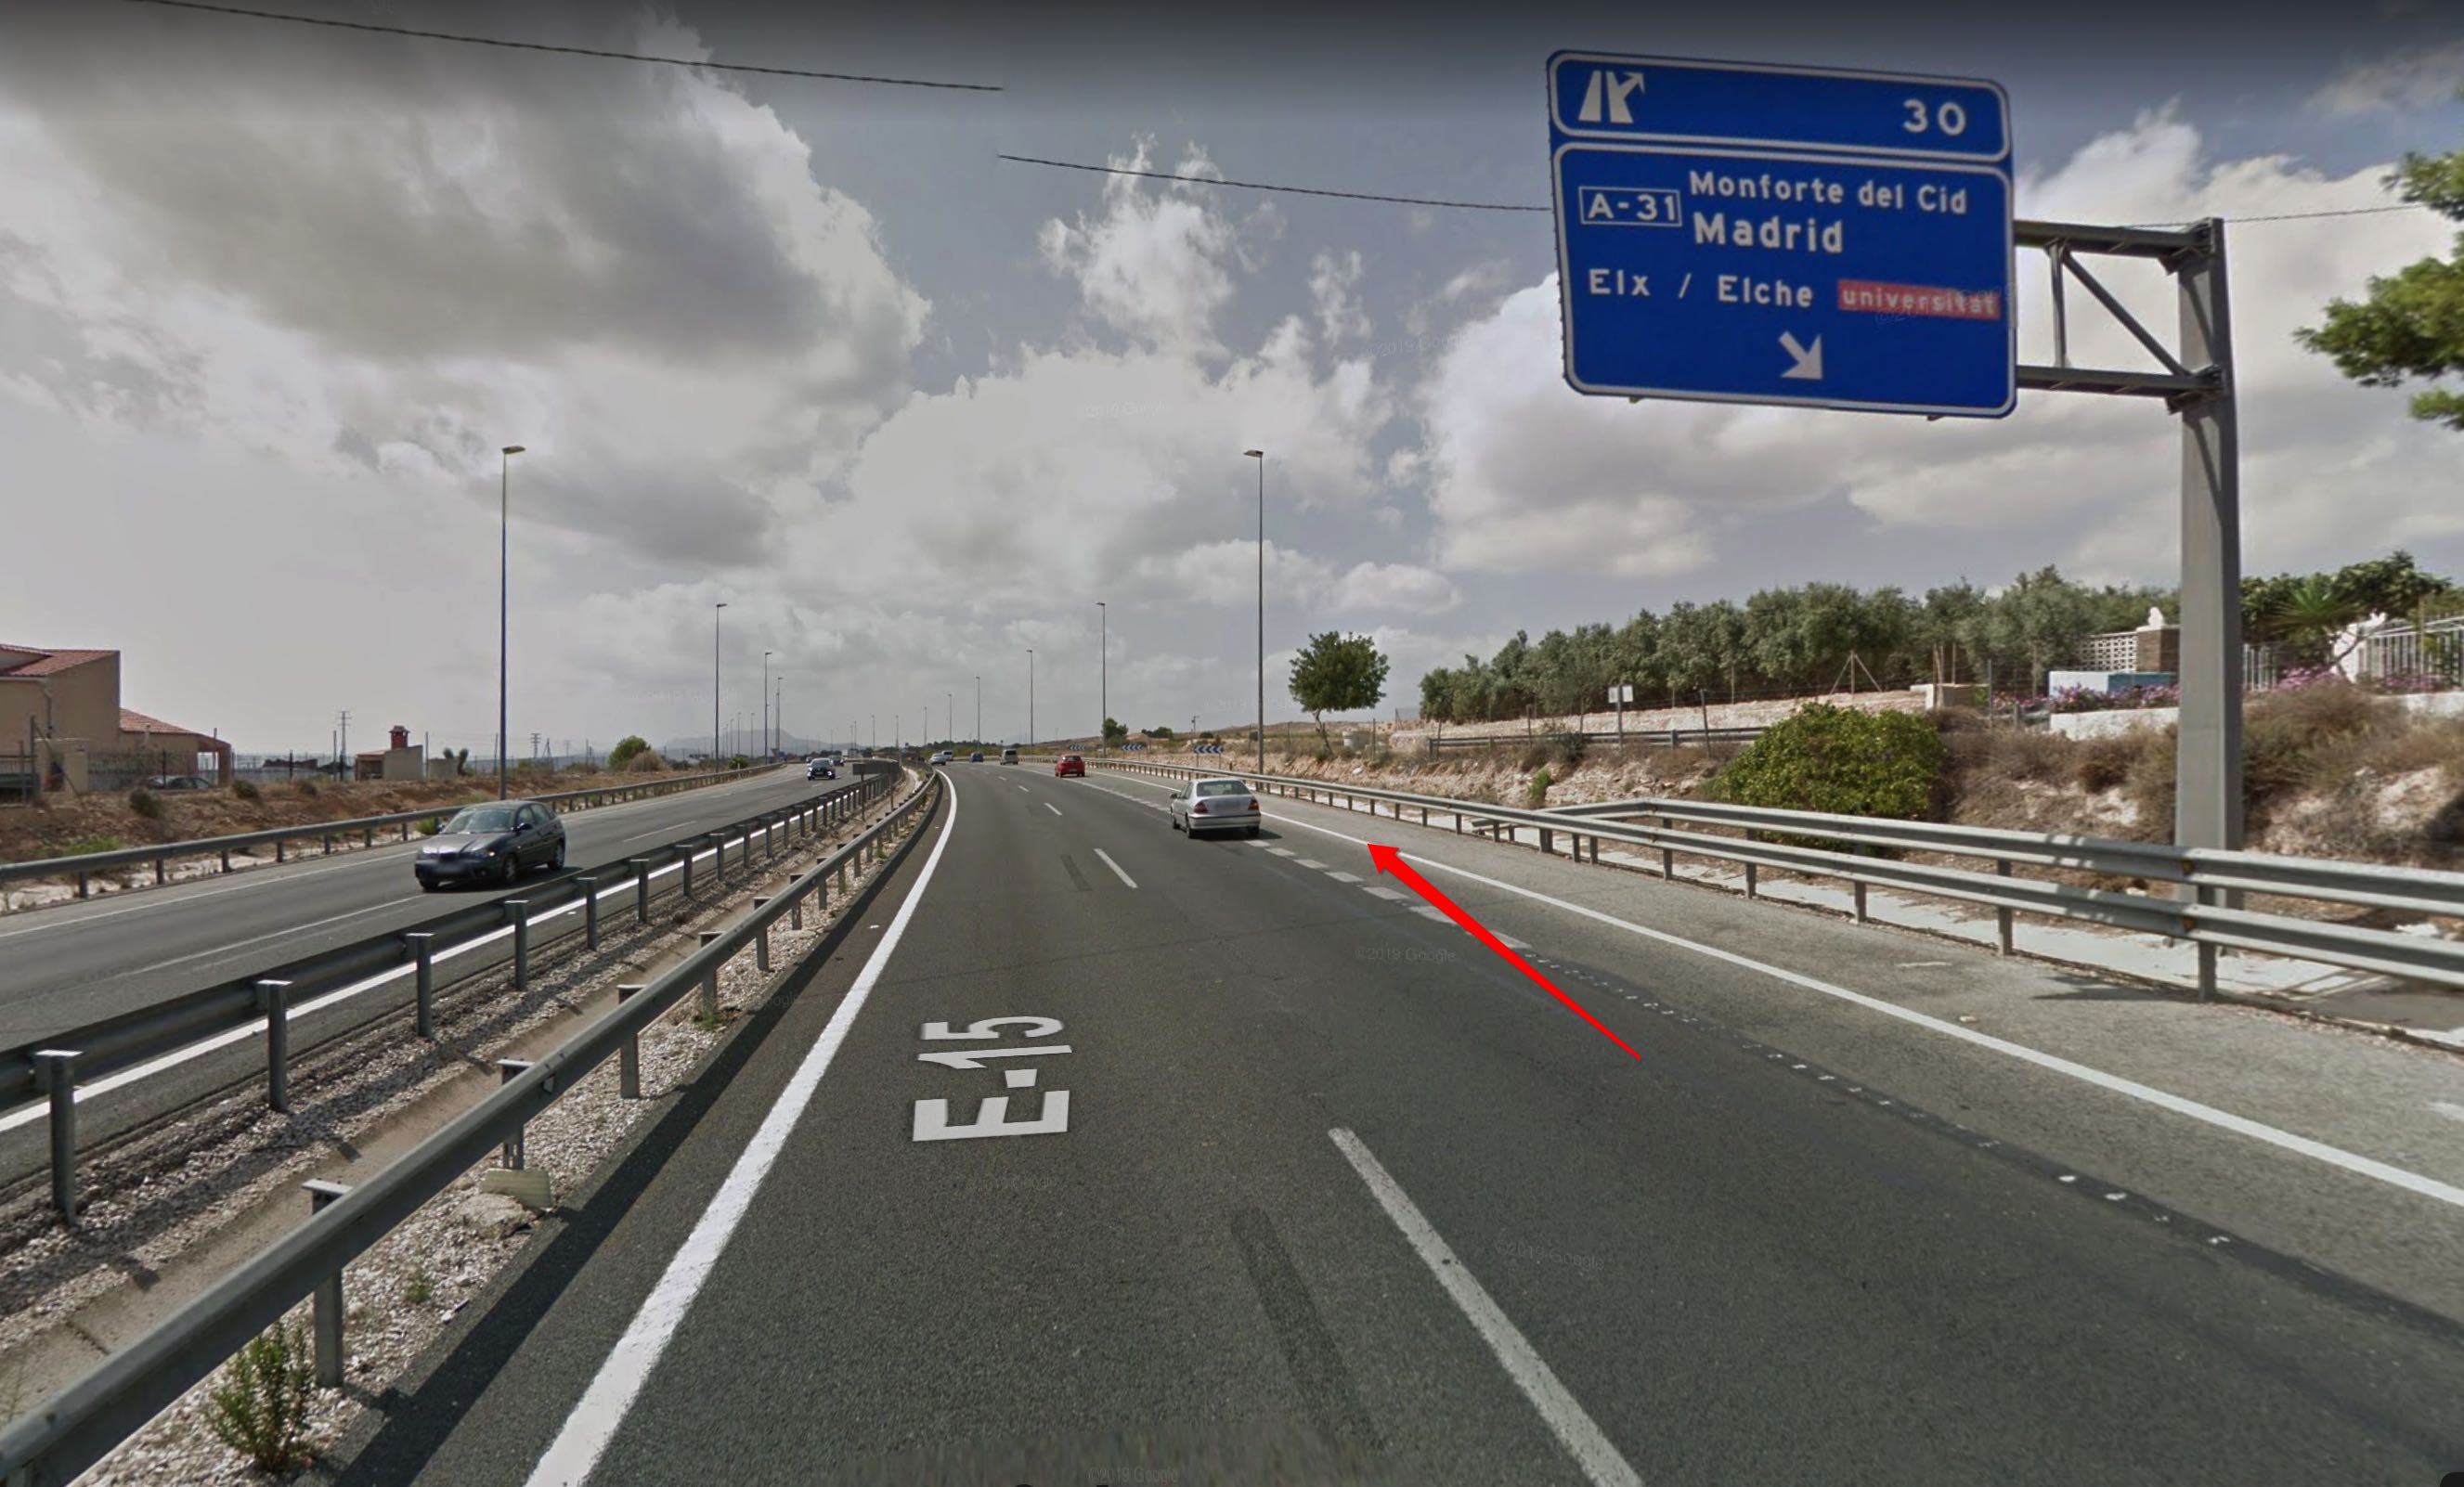 3 - Exit for A31 - Madridjpg